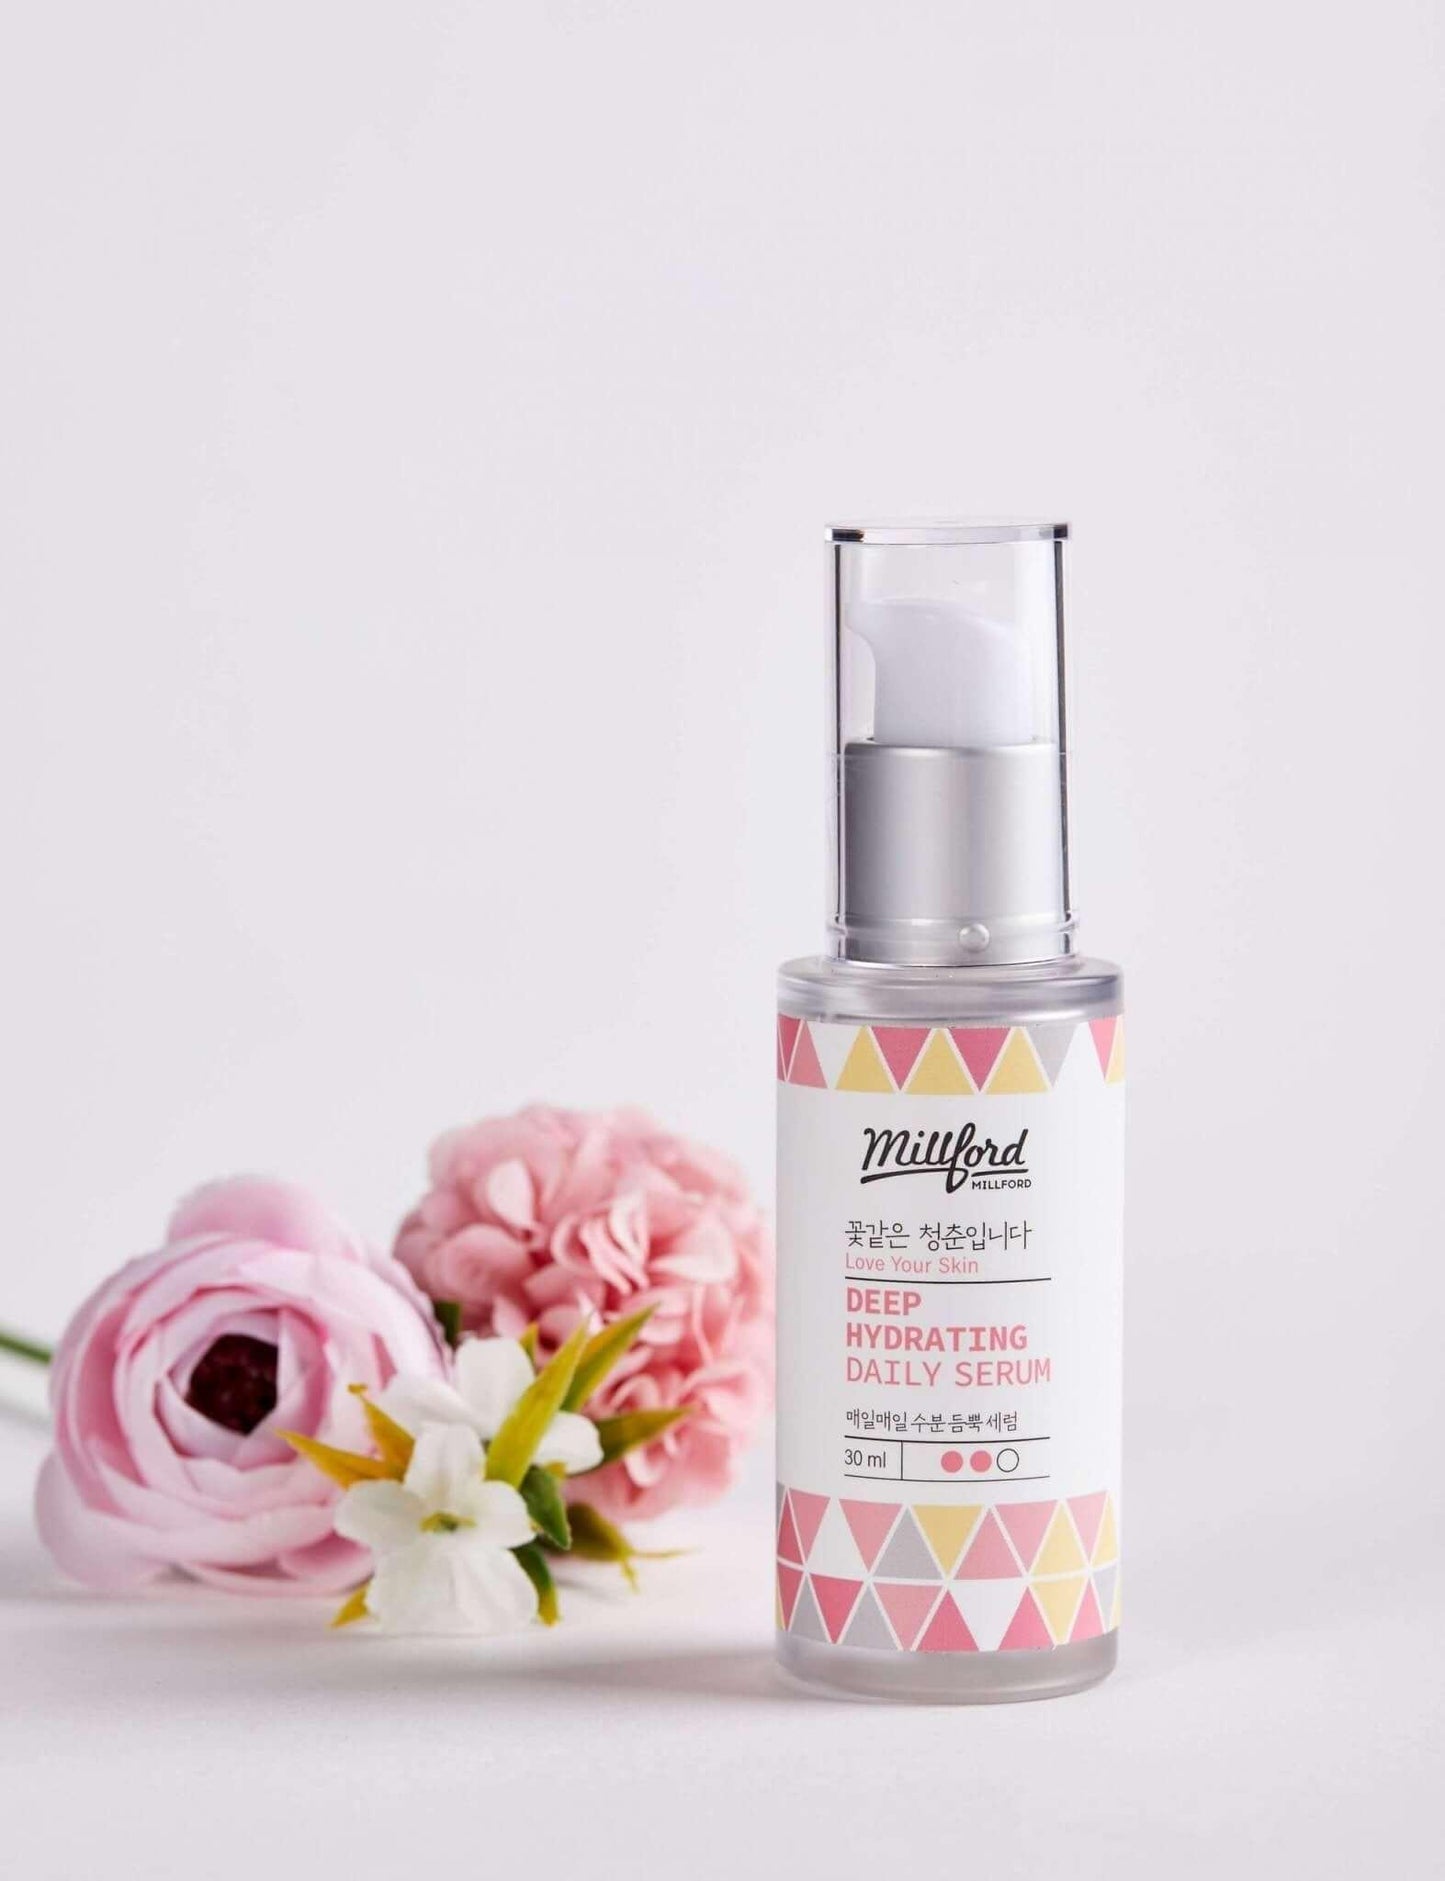 Millford Deep Hydrating Daily Serum from Millford